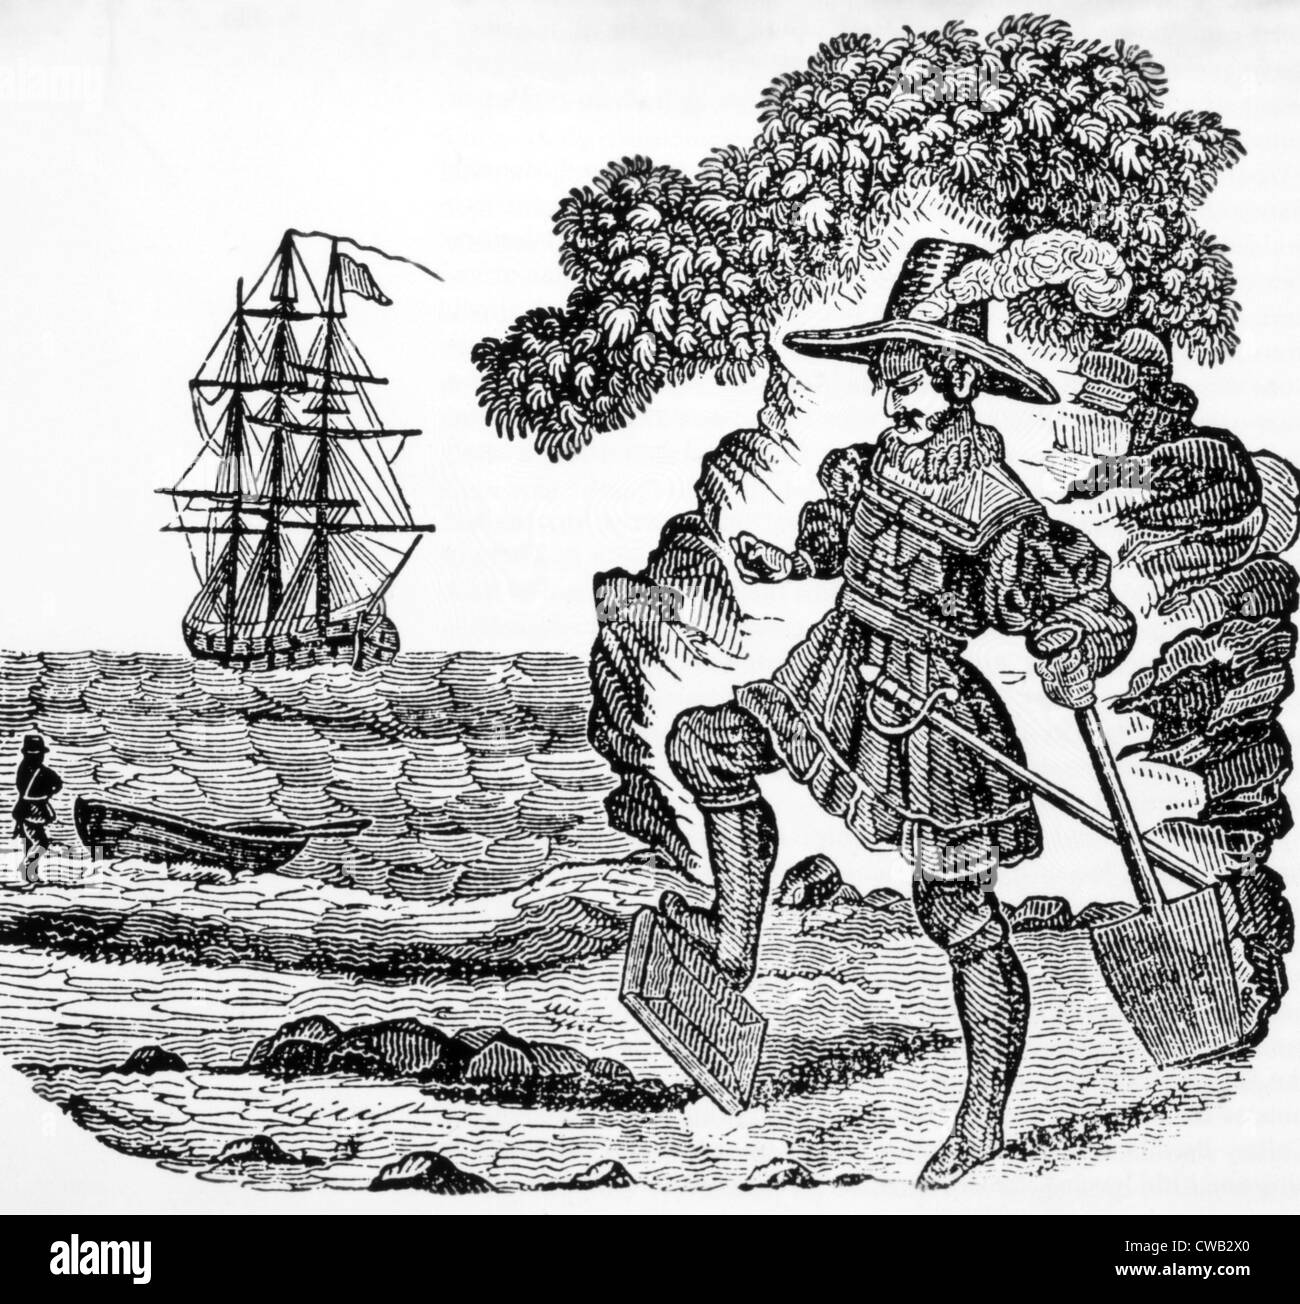 Captain William Kidd, (c. 1645-1701), British privateer and pirate shown burying a Bible near Plymouth Sound to launch his Stock Photo